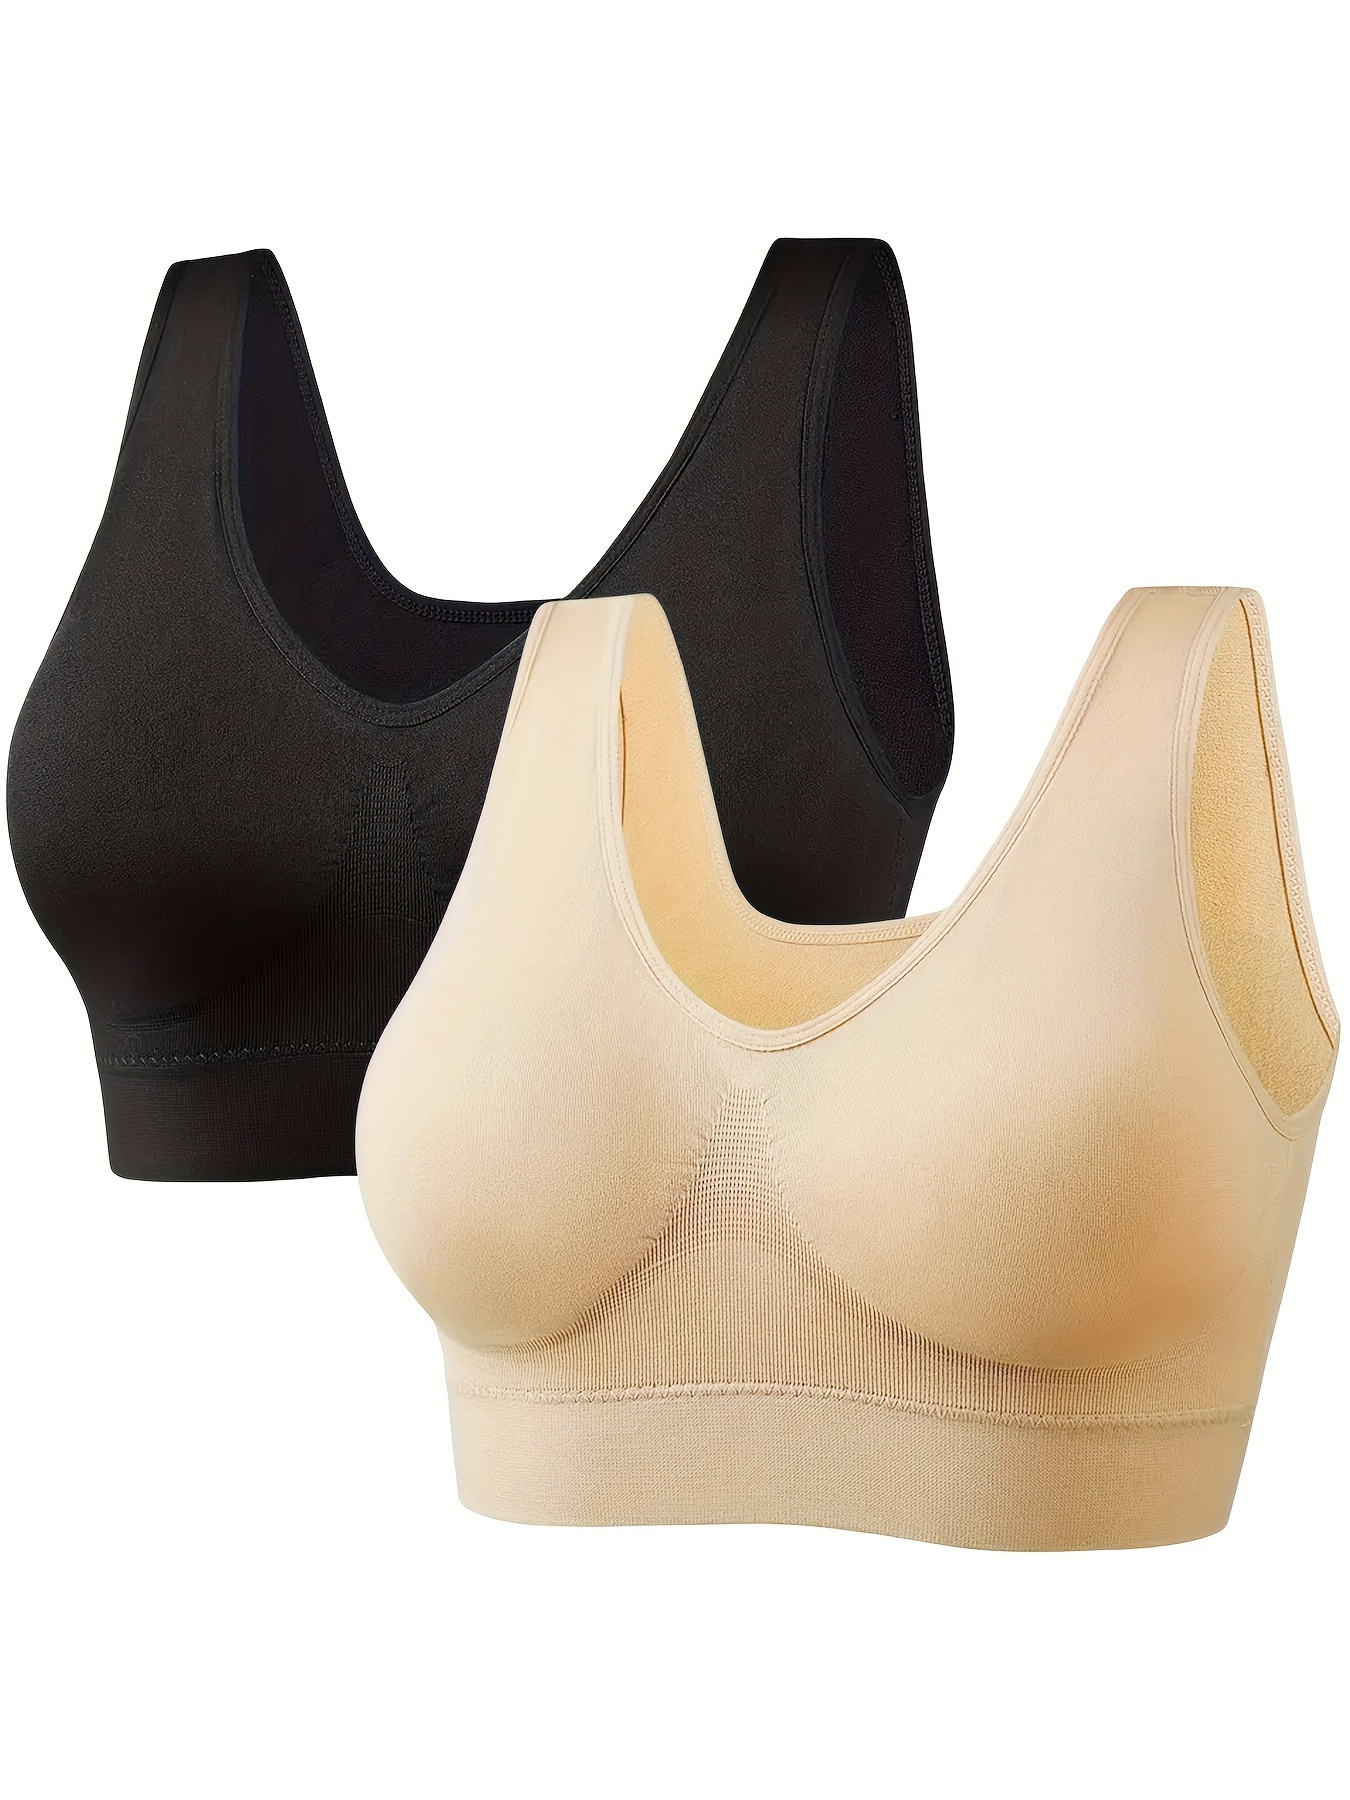 Bras for Women Wirefree - Whitr/Black- 2pcs, Removable Pads